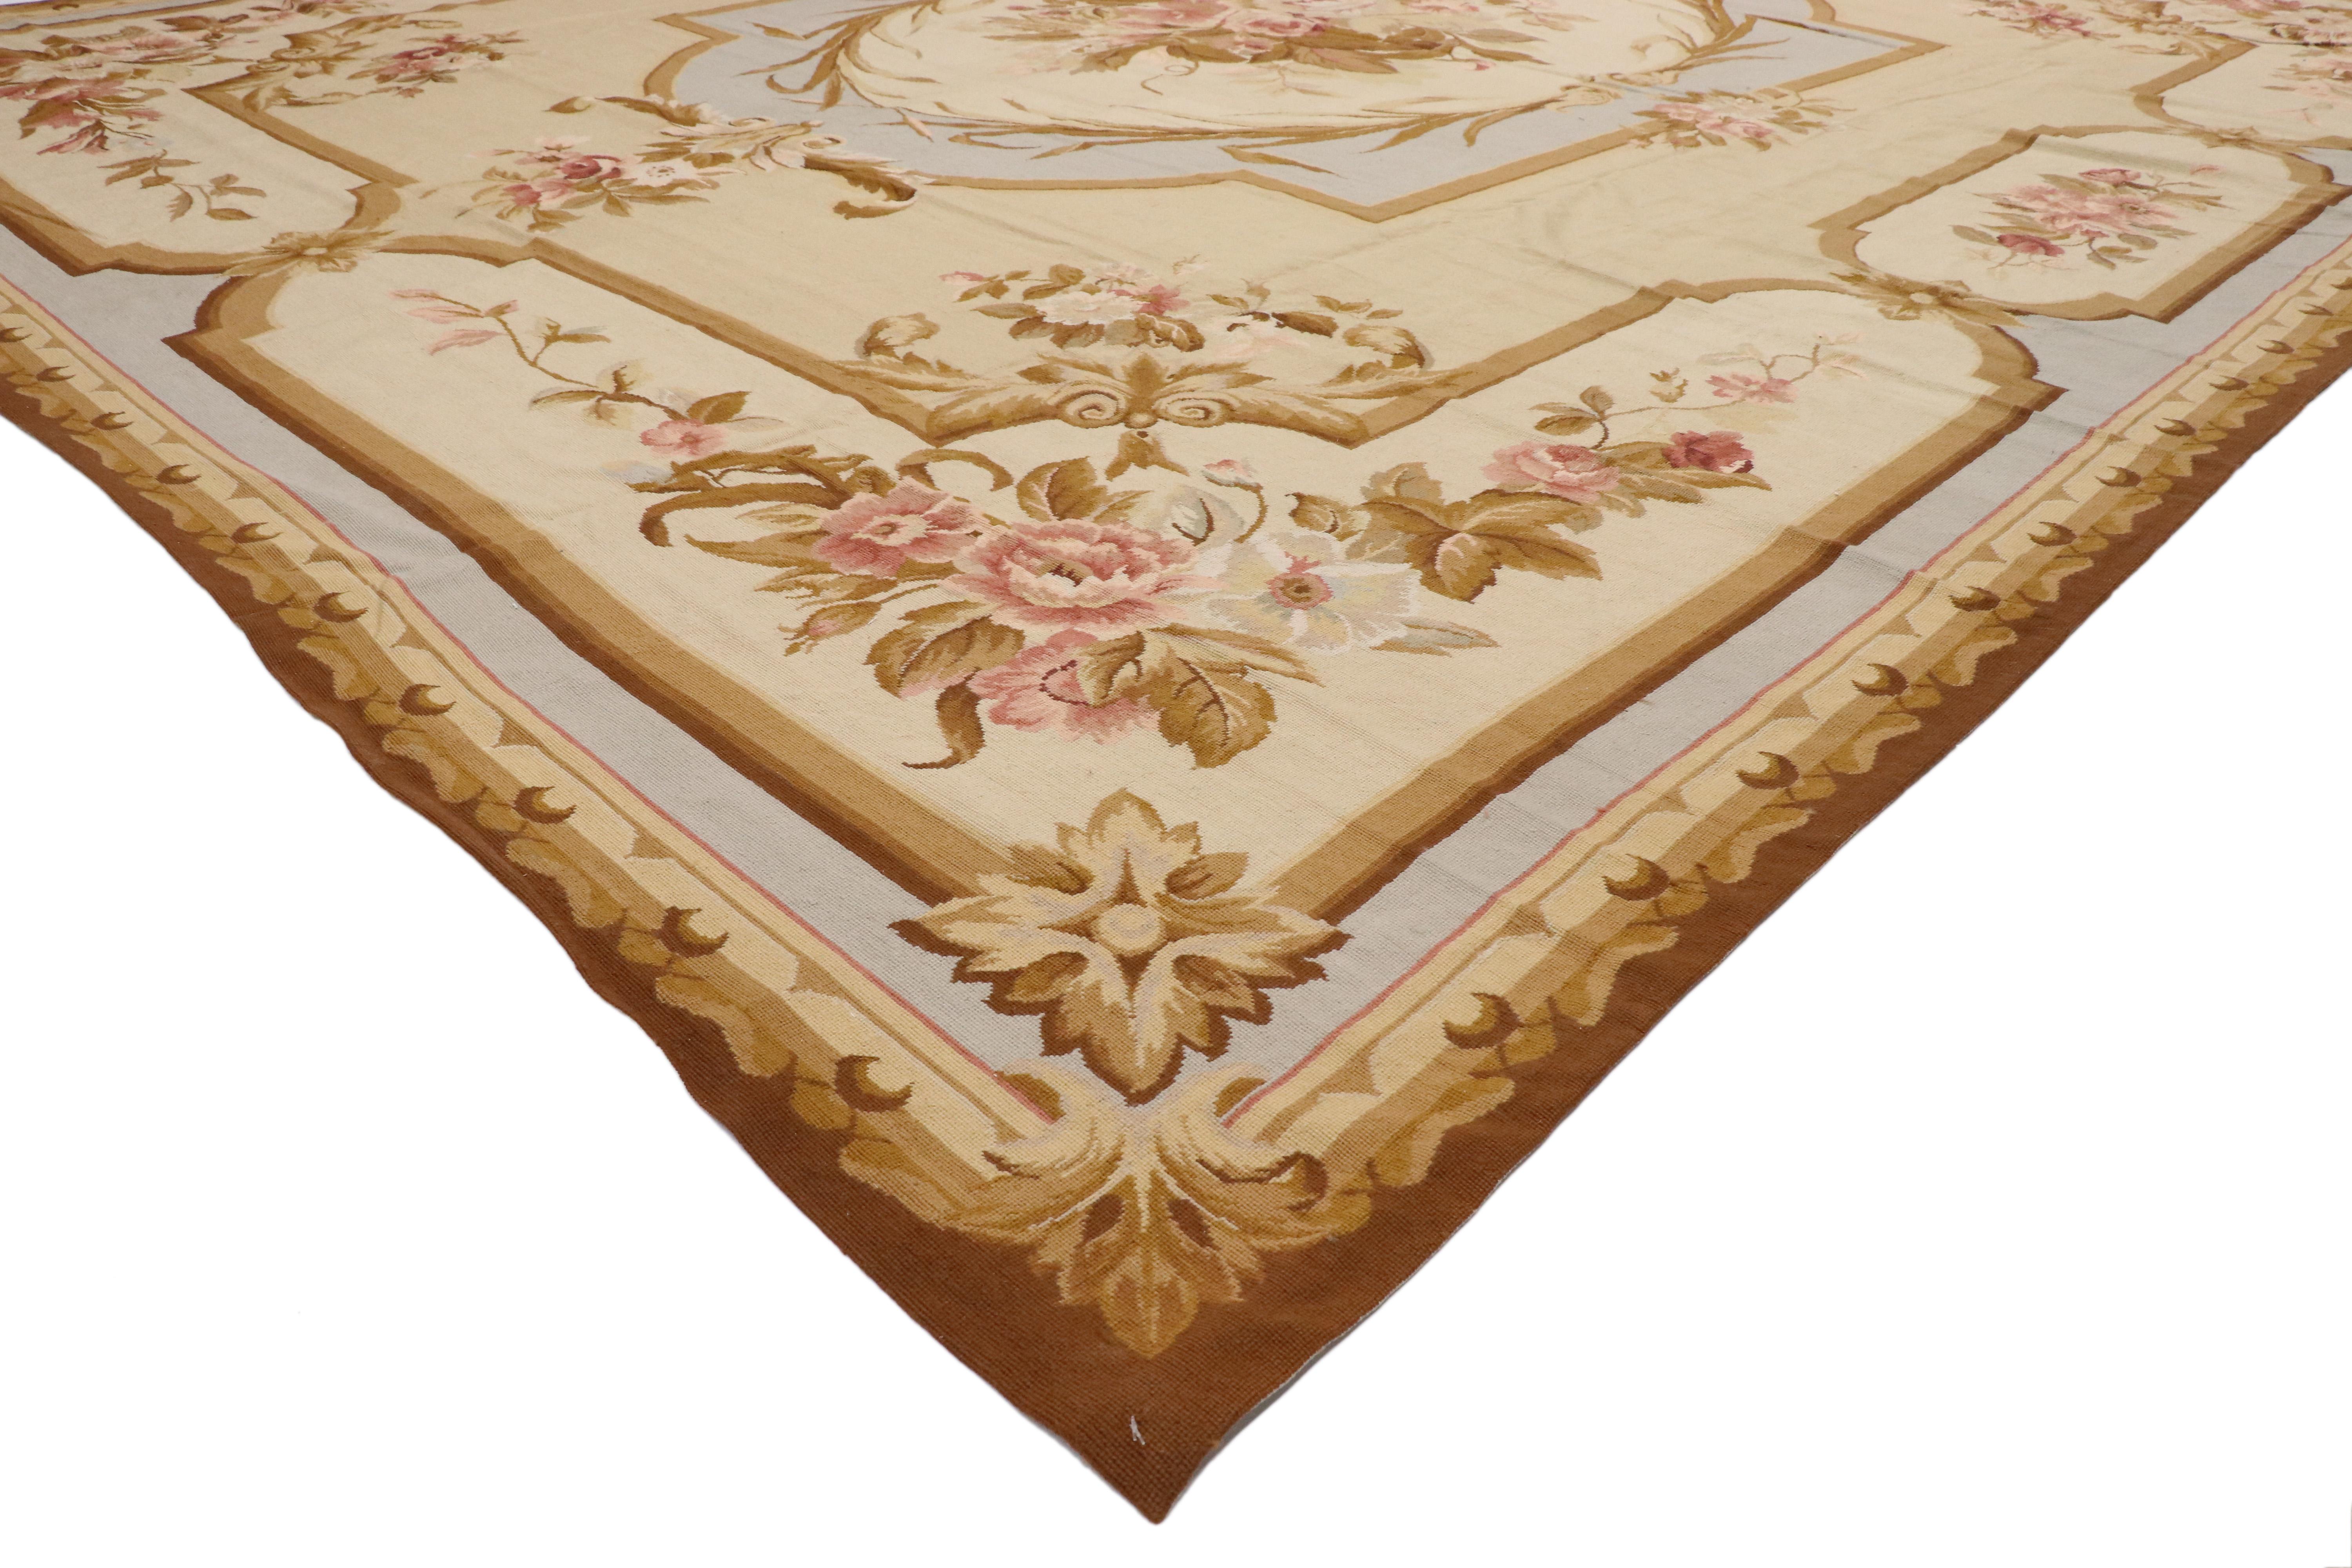 74213 Vintage Aubusson French Victorian Chinese Needlepoint Rug with Chintz Style 12'06 x 15'06. Drawing inspiration from Mario Buatta, Chintz style and design elements from the 18th century in France, this vintage Chinese Aubusson style needlepoint